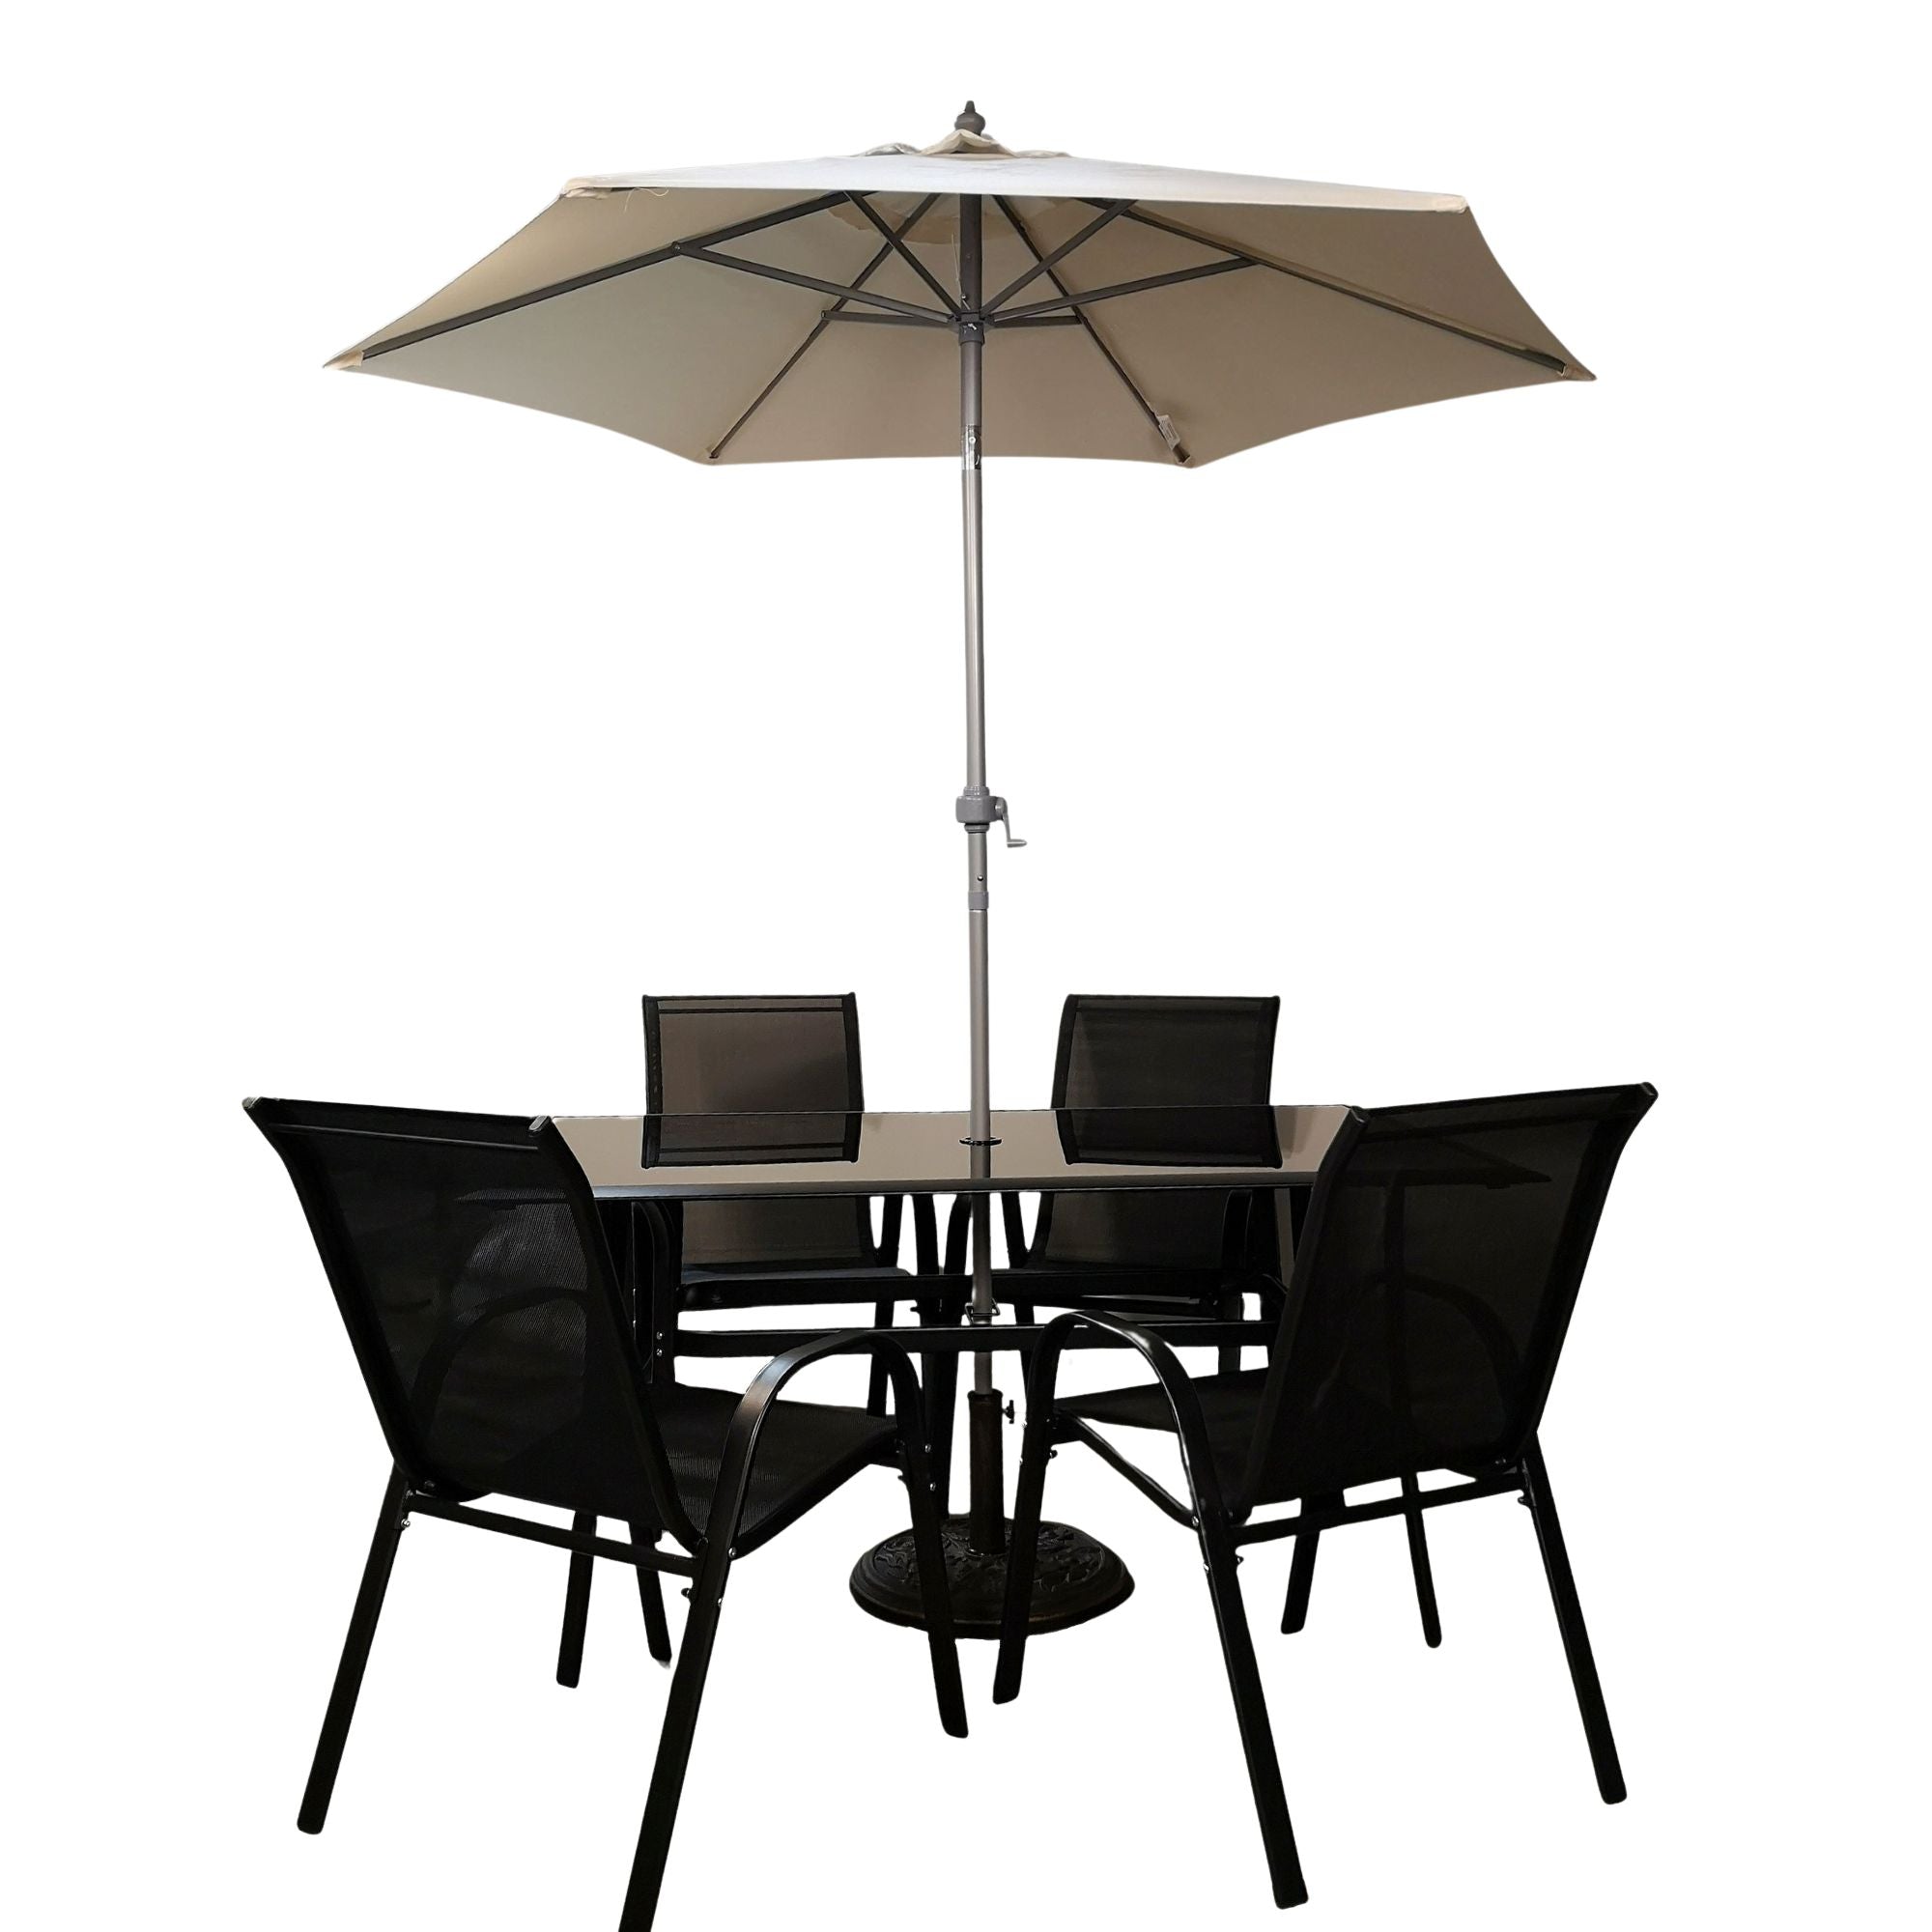 Outdoor 4 Person Rectangular Glass Top Garden Patio Dining Table Chairs With Cream Parasol and Base Set